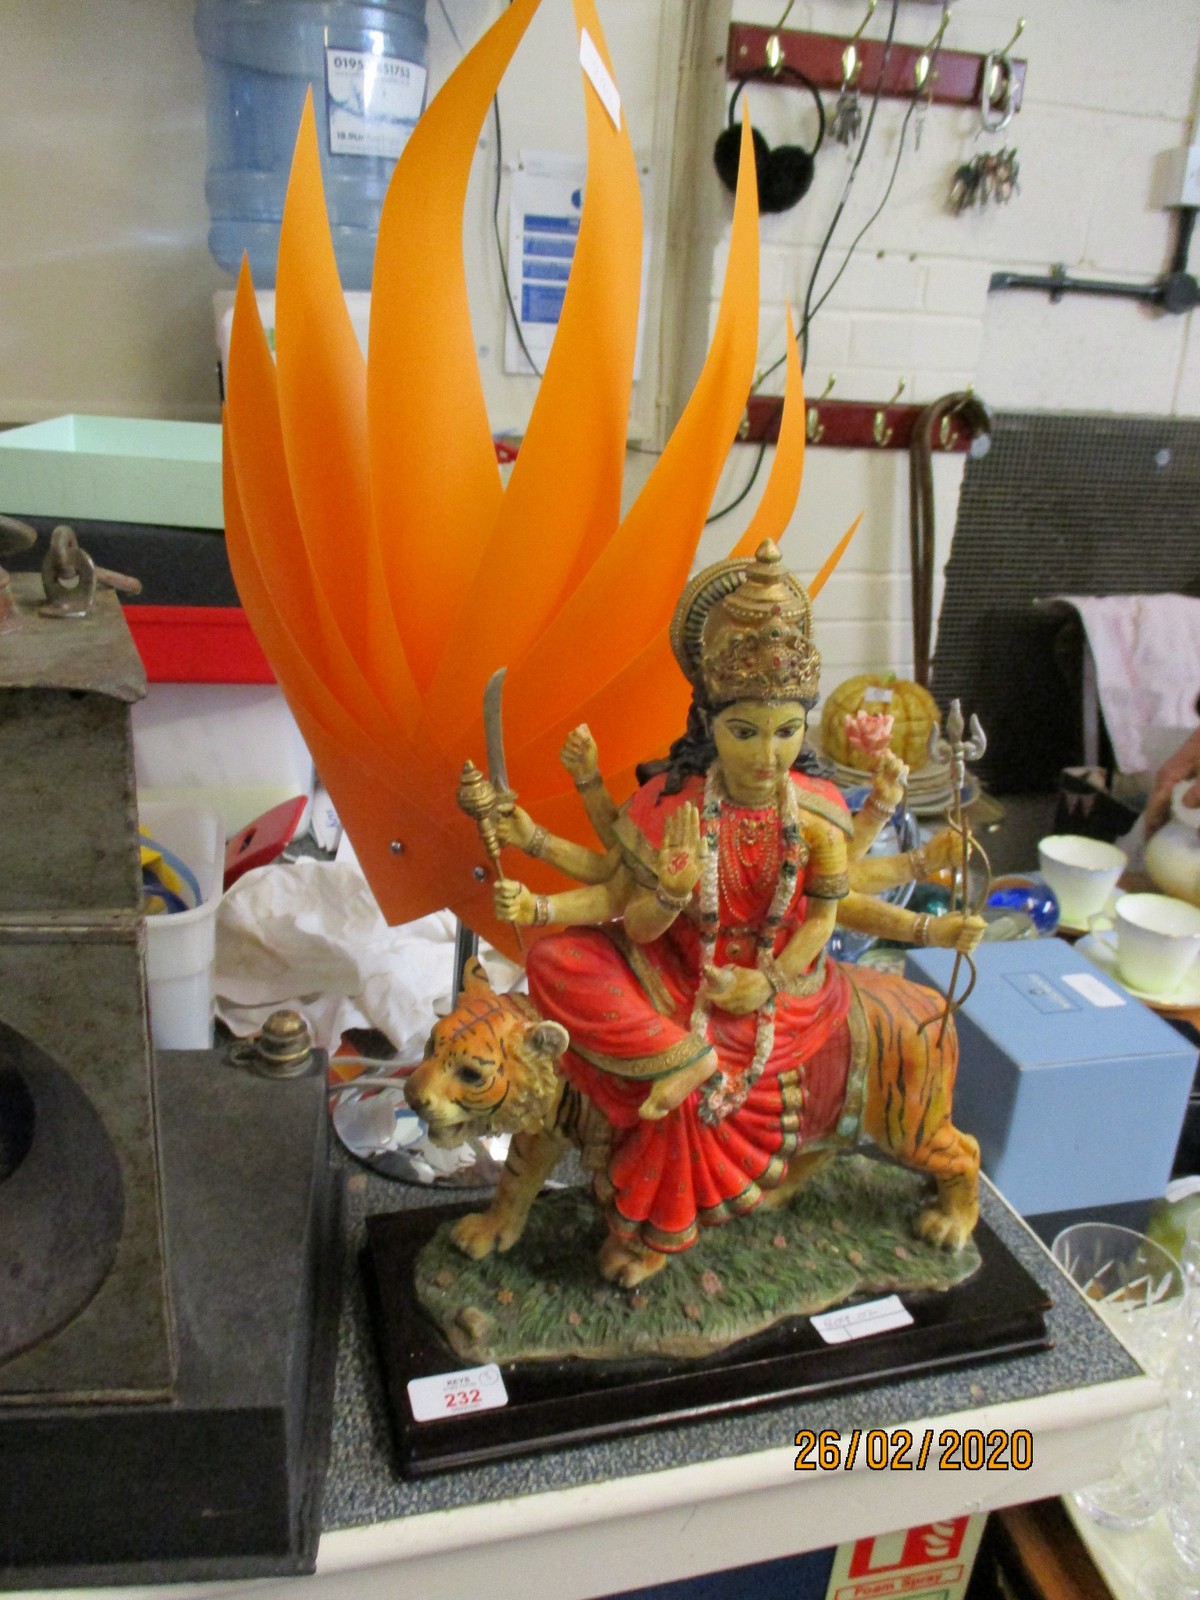 MODERN MODEL OF A SHIVA SEATED ON A TIGER, GLASS JUG AND MODERN TABLE LAMP